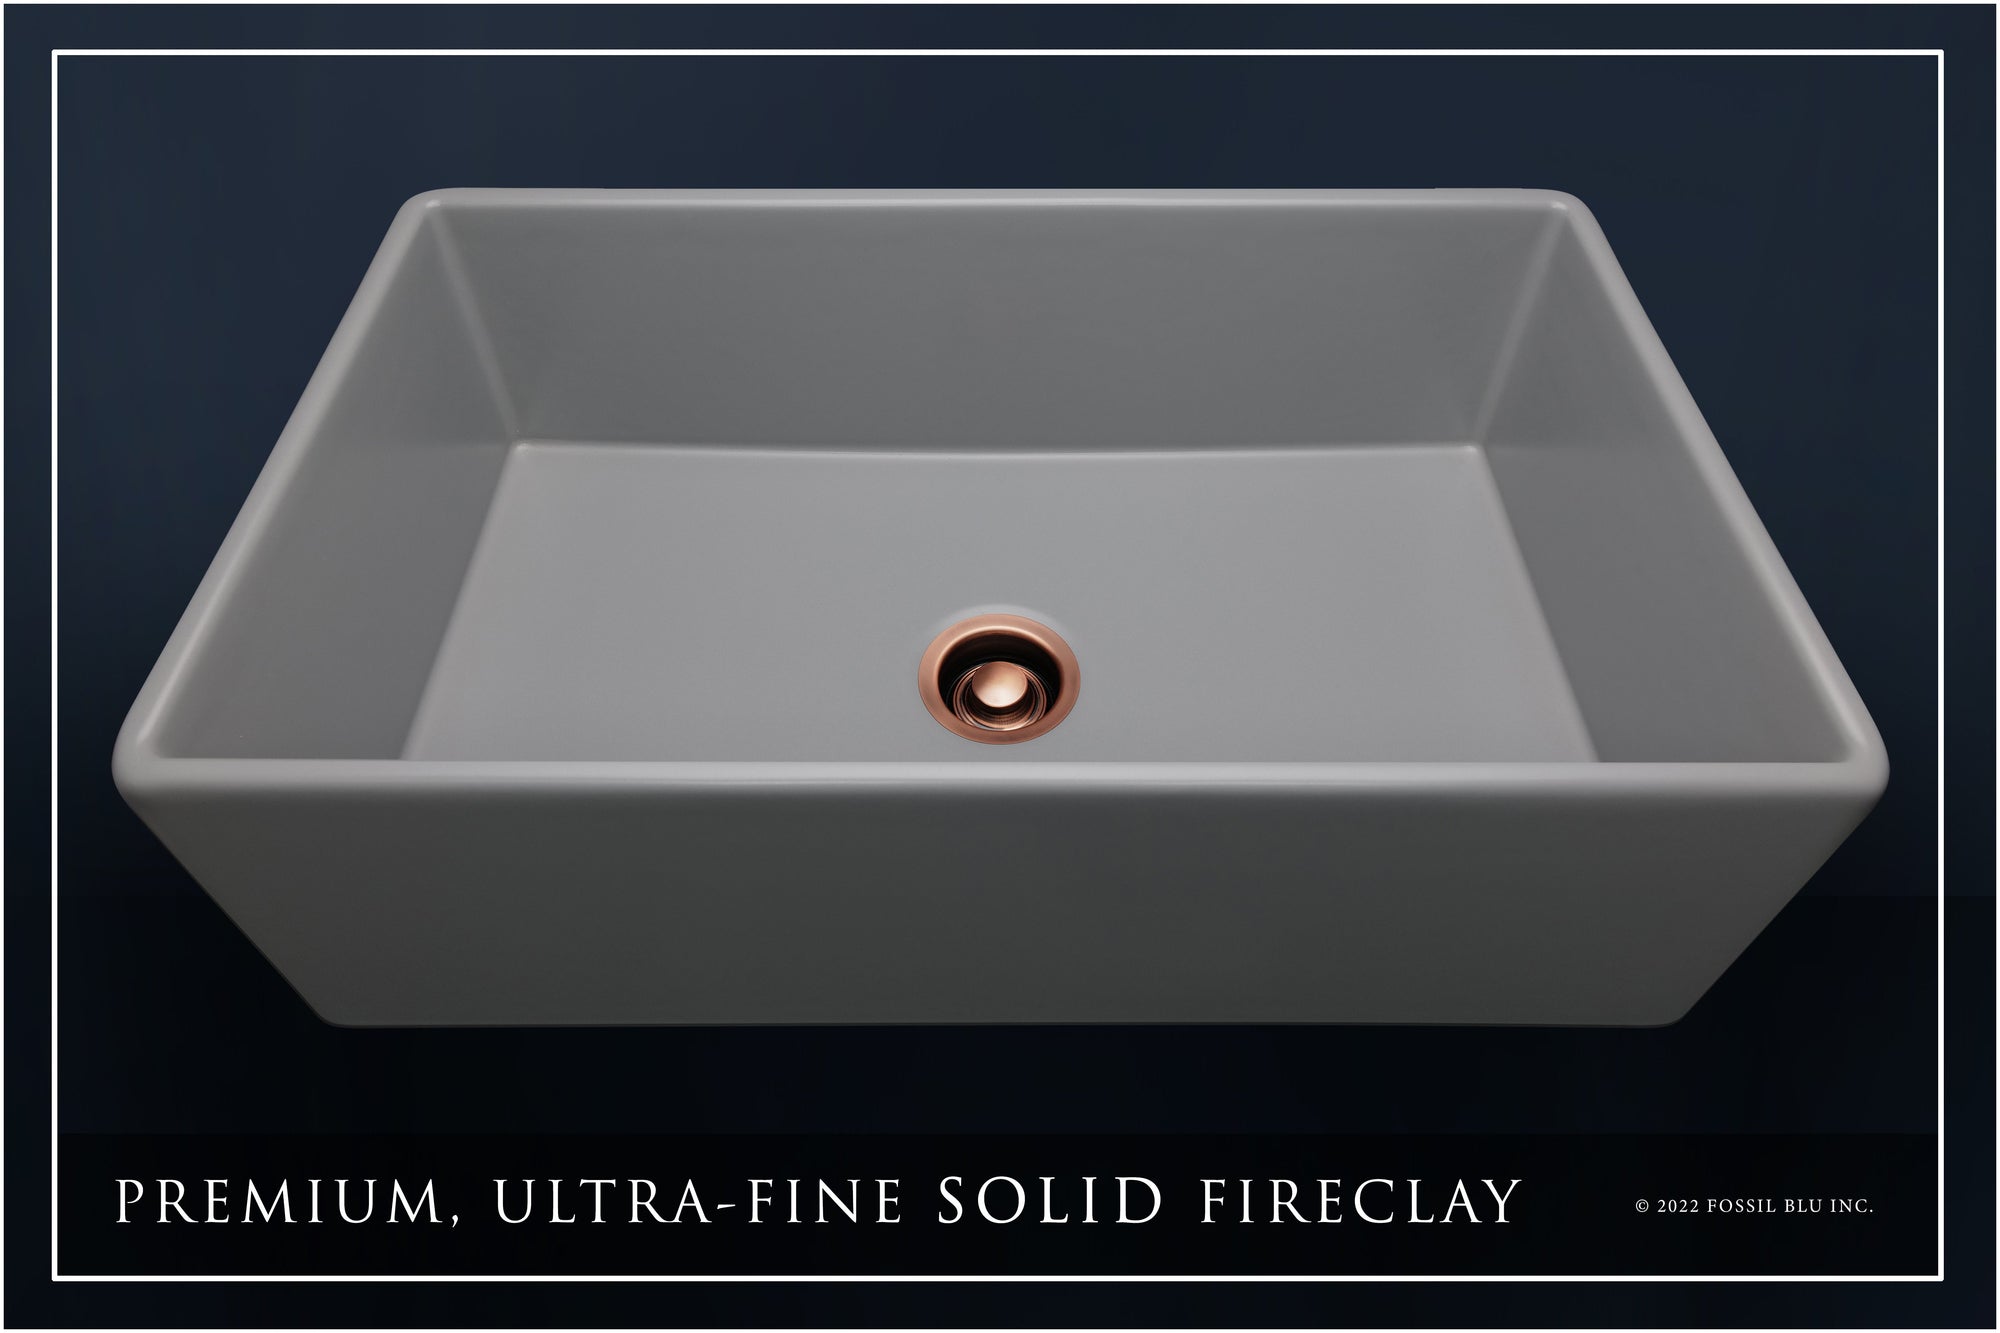 FSW1042AC LUXURY 33-INCH SOLID FIRECLAY FARMHOUSE SINK, MATTE GRAY, ANTIQUE COPPER ACCS, FLAT FRONT